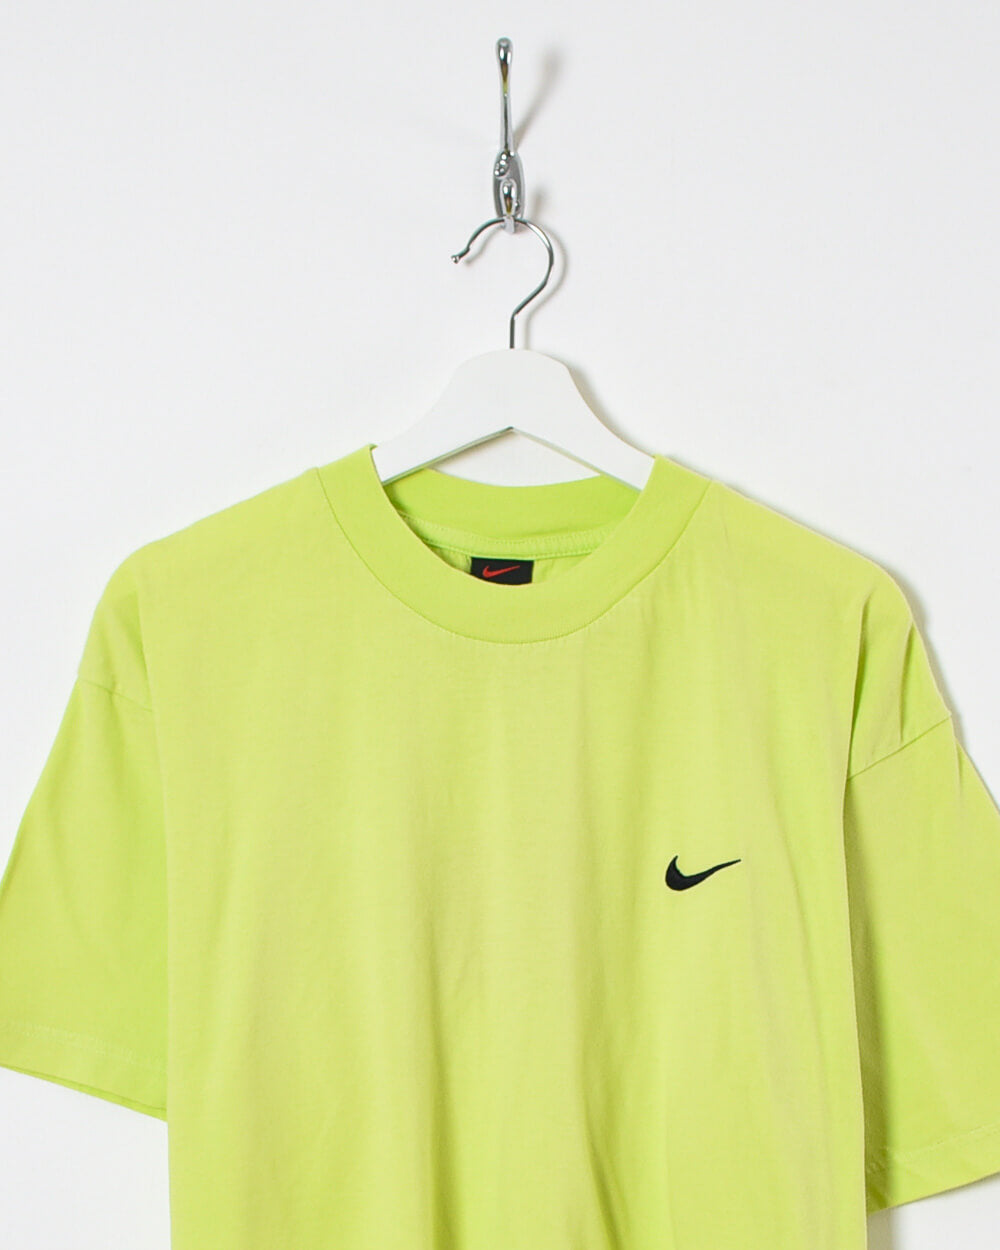 Nike T-Shirt - X-Large - Domno Vintage 90s, 80s, 00s Retro and Vintage Clothing 